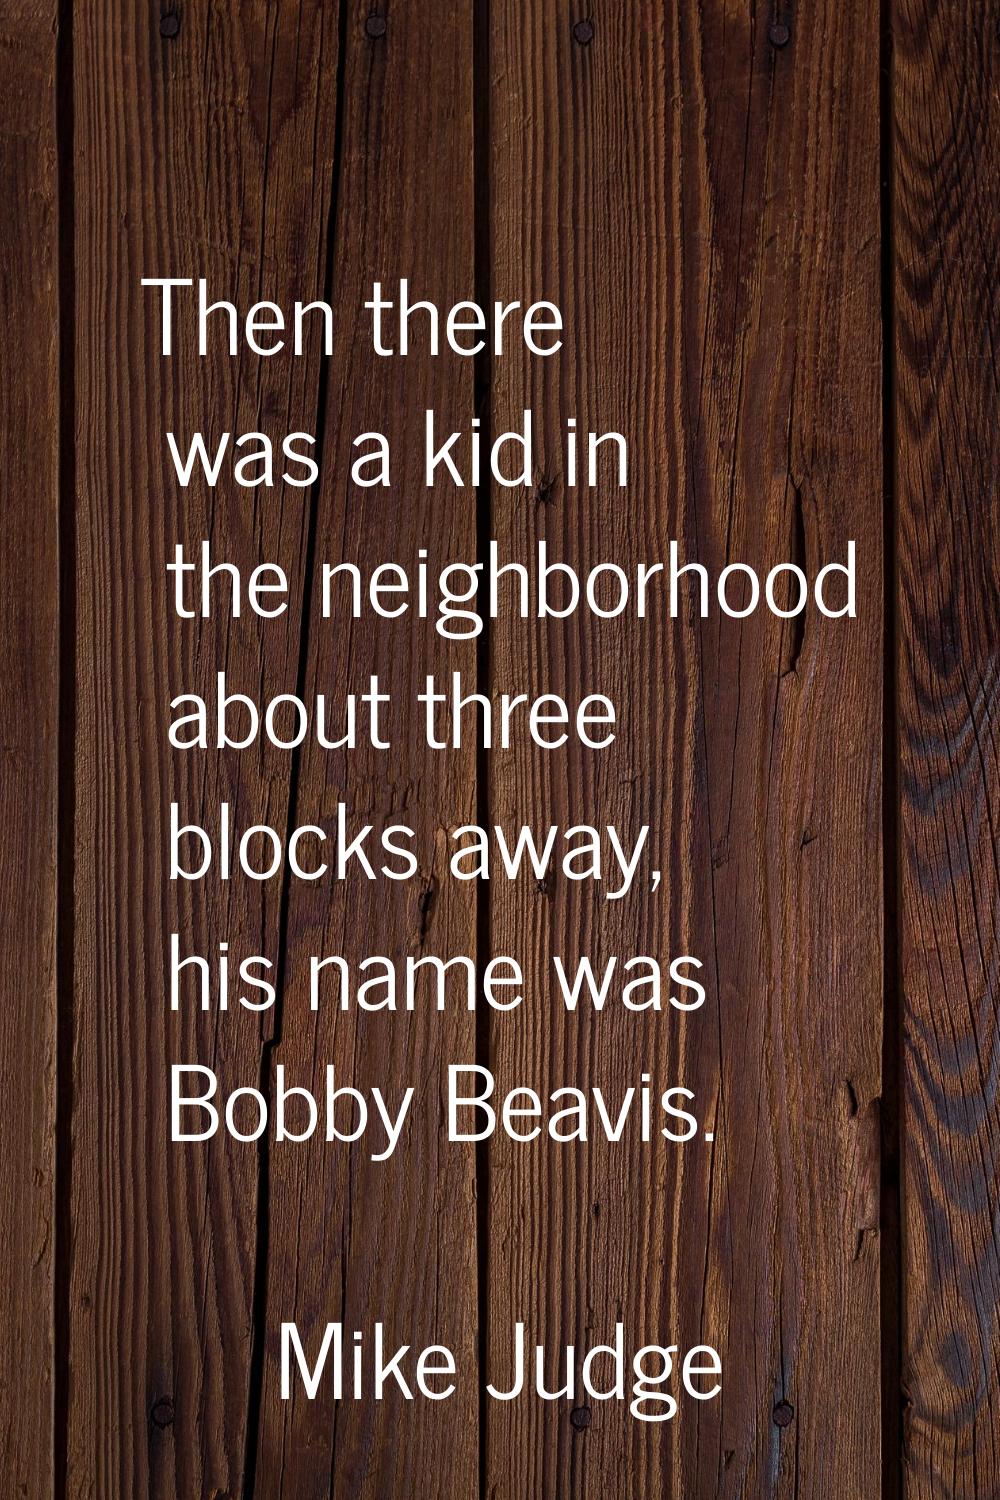 Then there was a kid in the neighborhood about three blocks away, his name was Bobby Beavis.